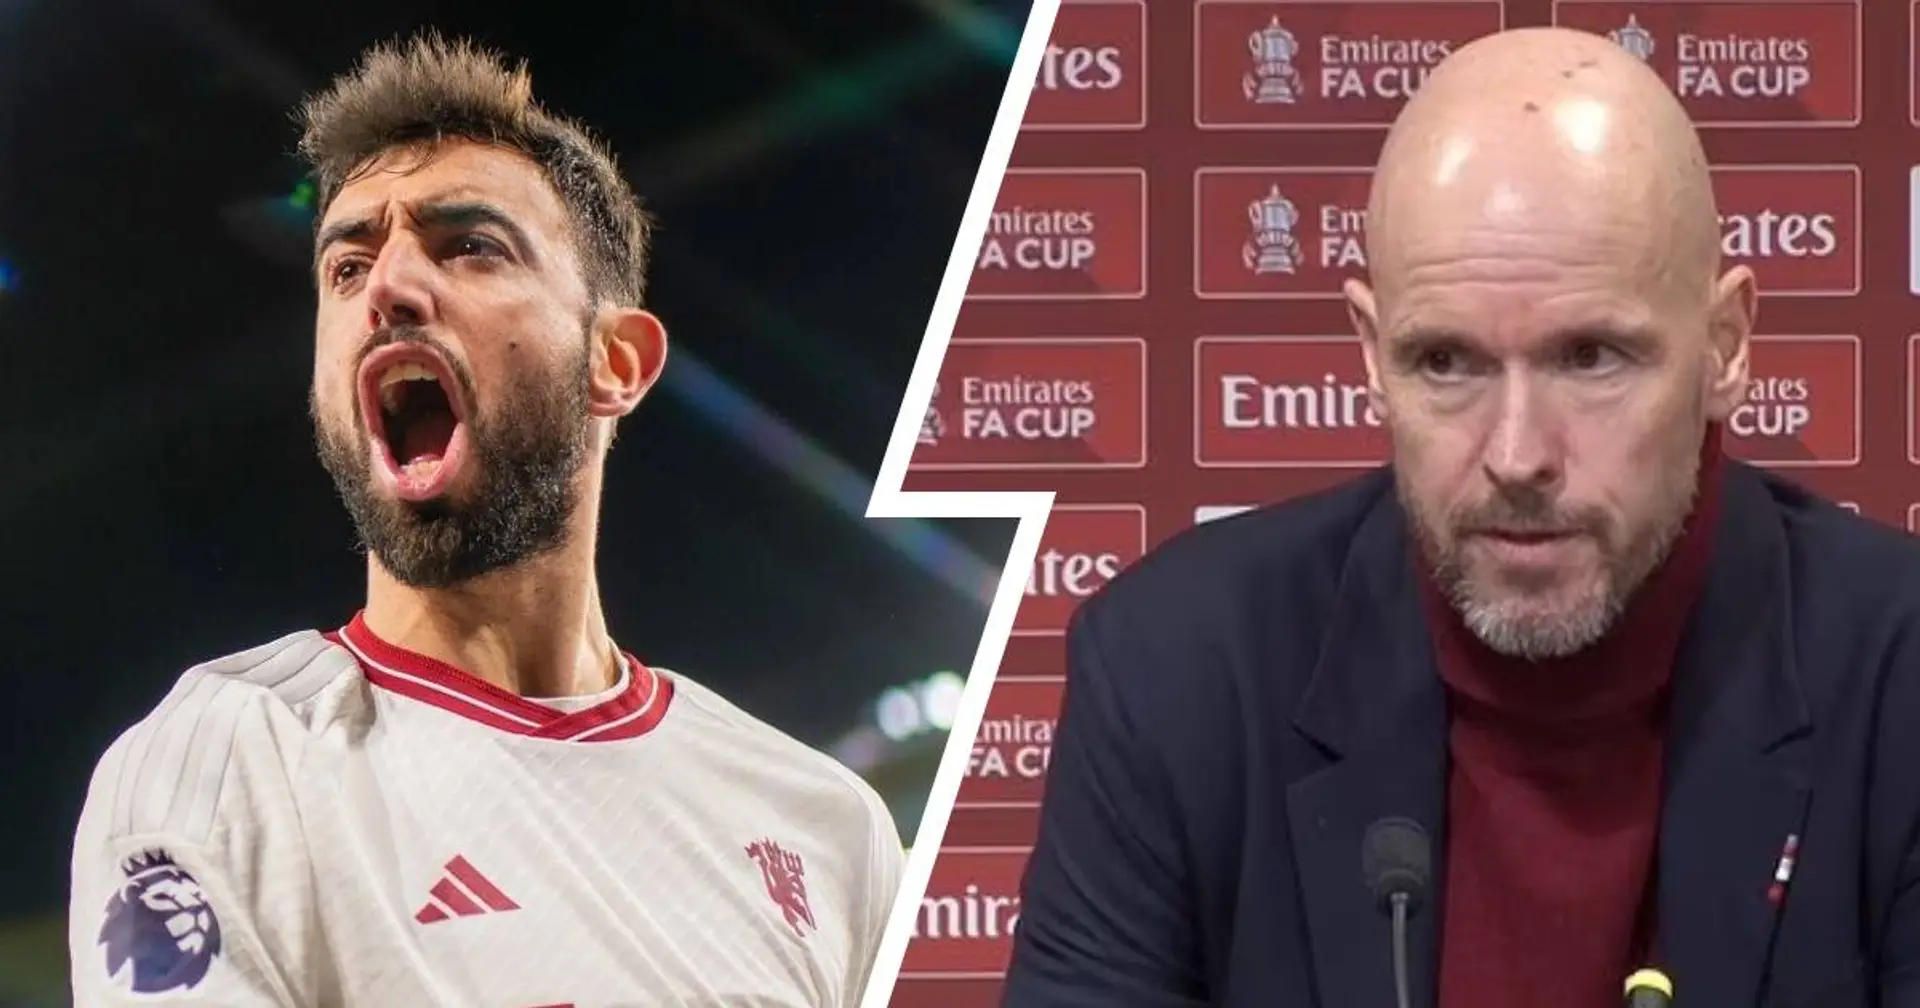 Ten Hag: 'Bruno played through injury but still gets criticised. It's pathetic'